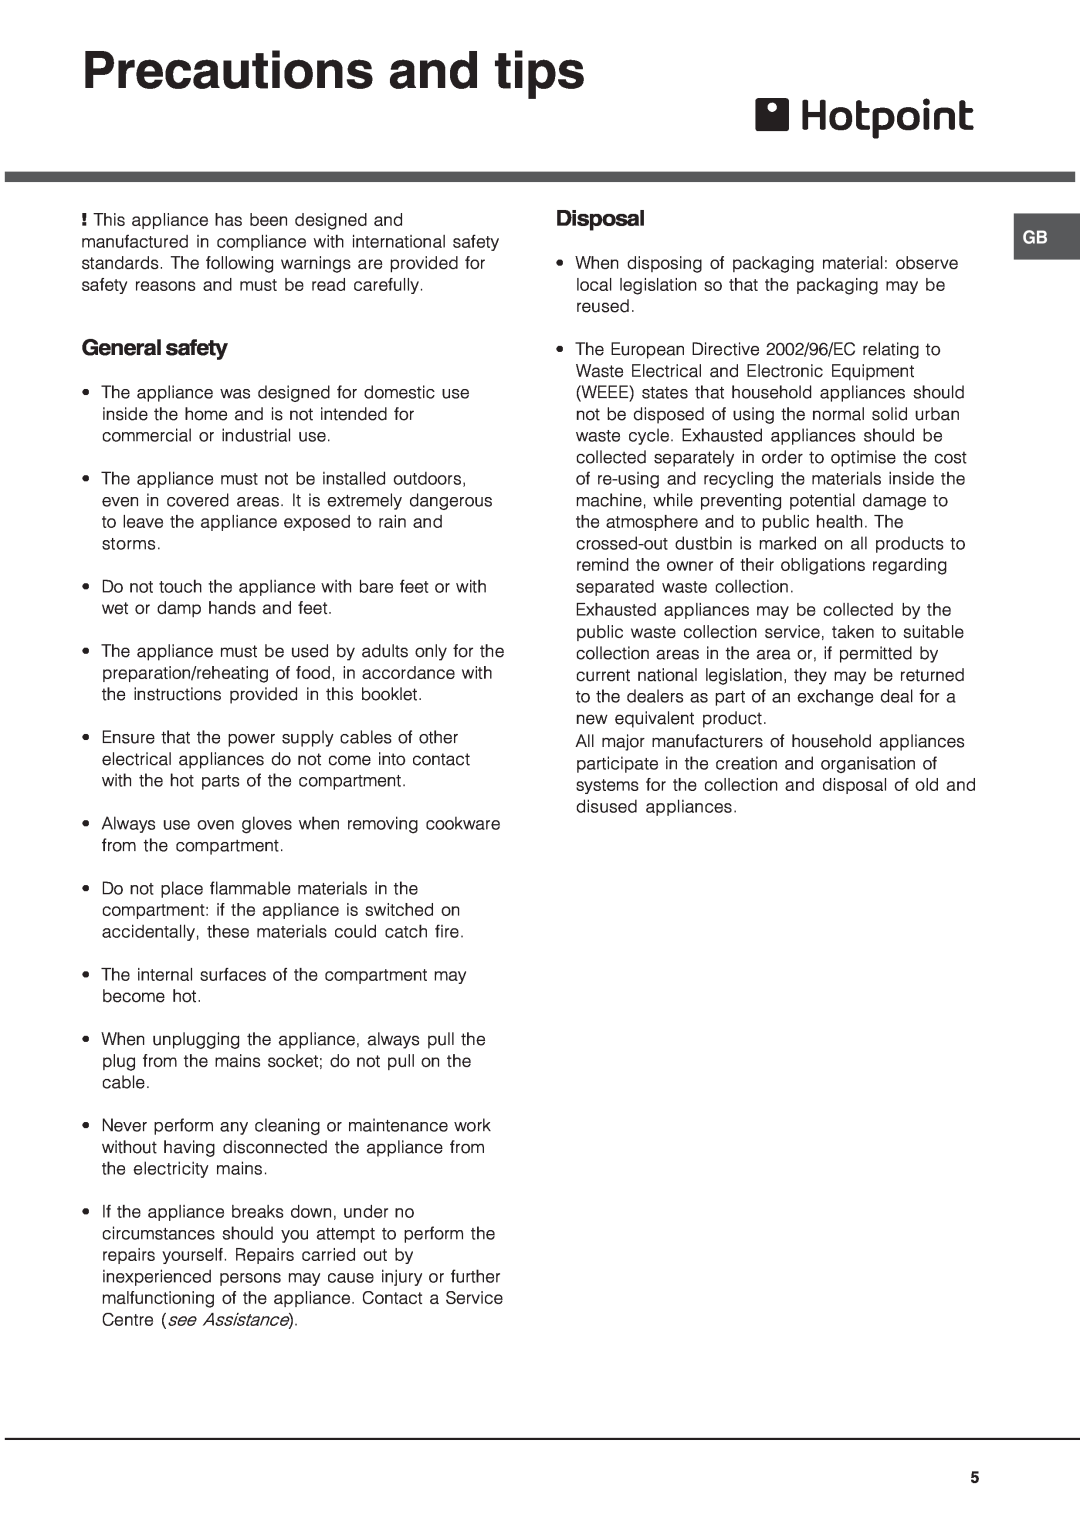 Hotpoint HWD24X operating instructions Precautions and tips, General safety, Disposal 